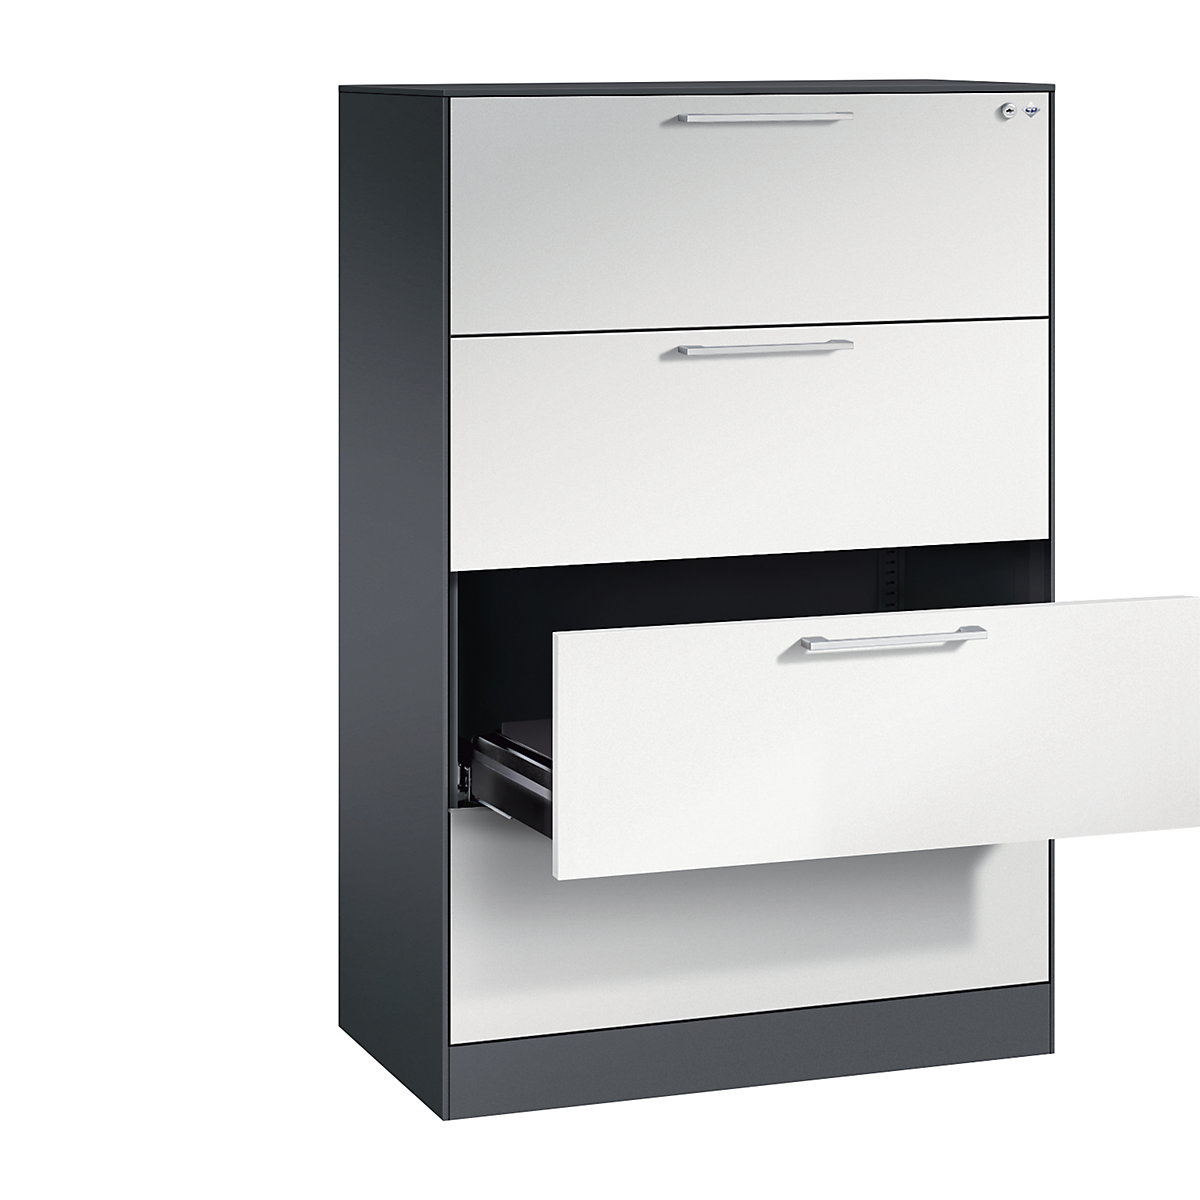 ASISTO card file cabinet – C+P, height 1292 mm, with 4 drawers, A4 landscape, black grey/light grey-10